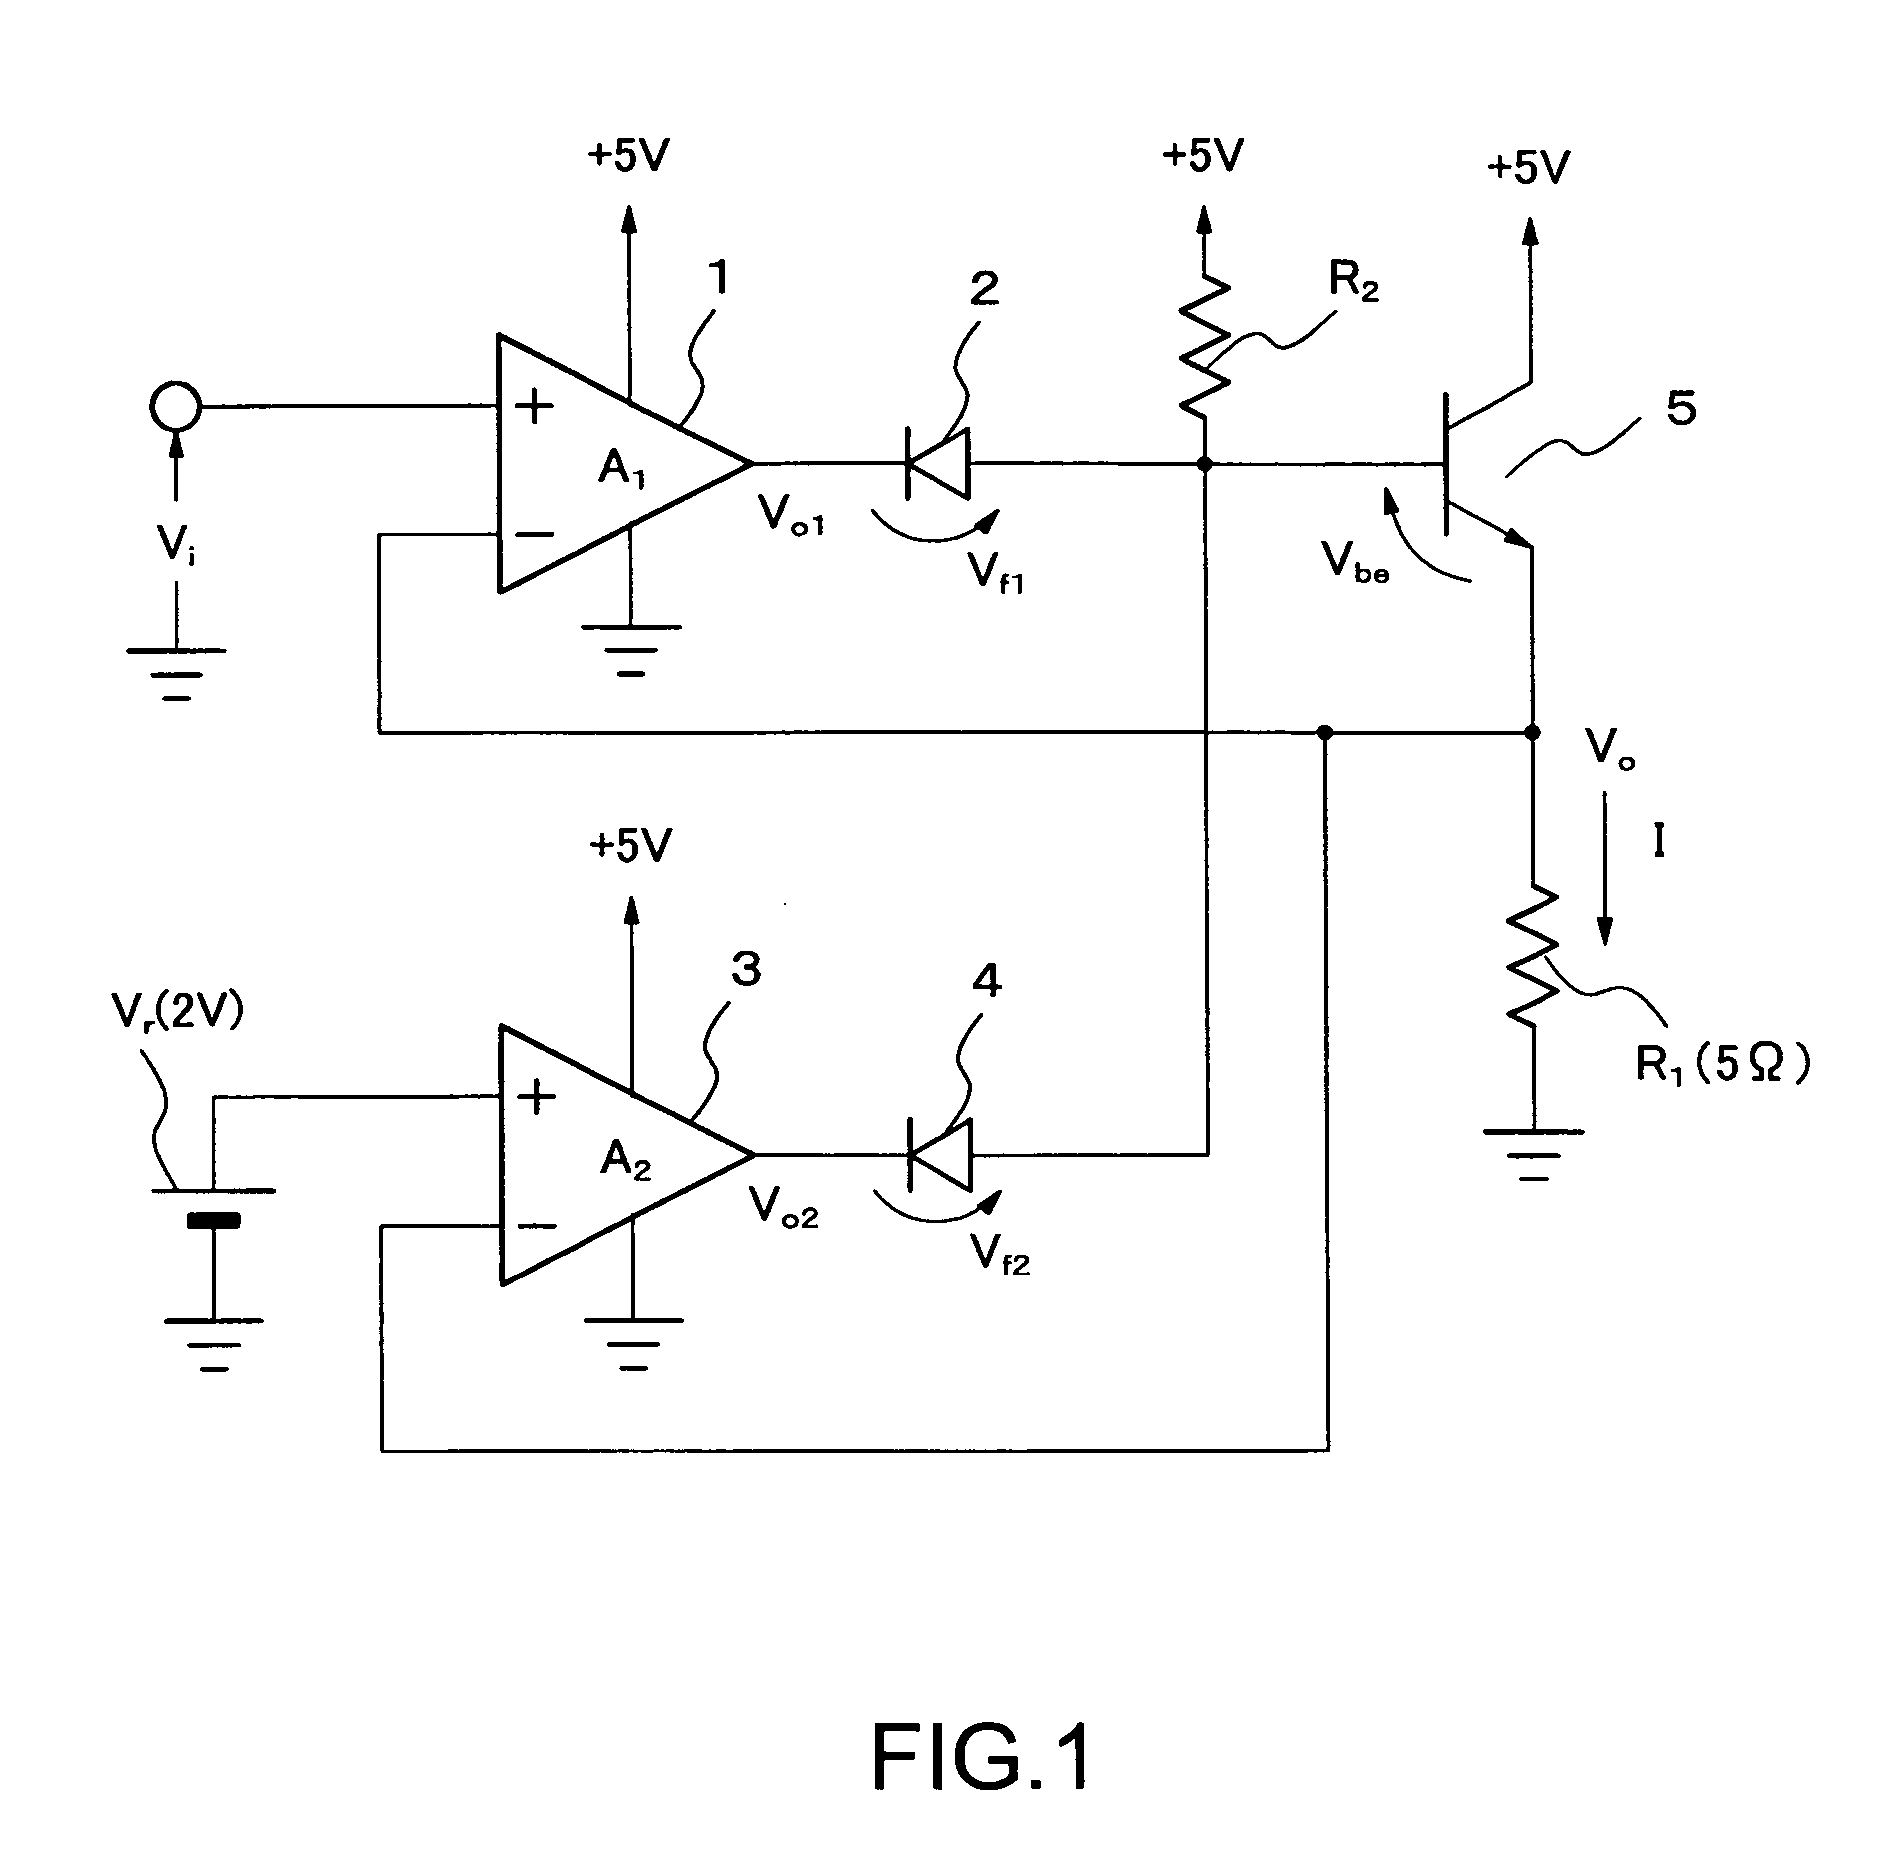 Current control circuit with limiter, temperature control circuit, and brightness control circuit